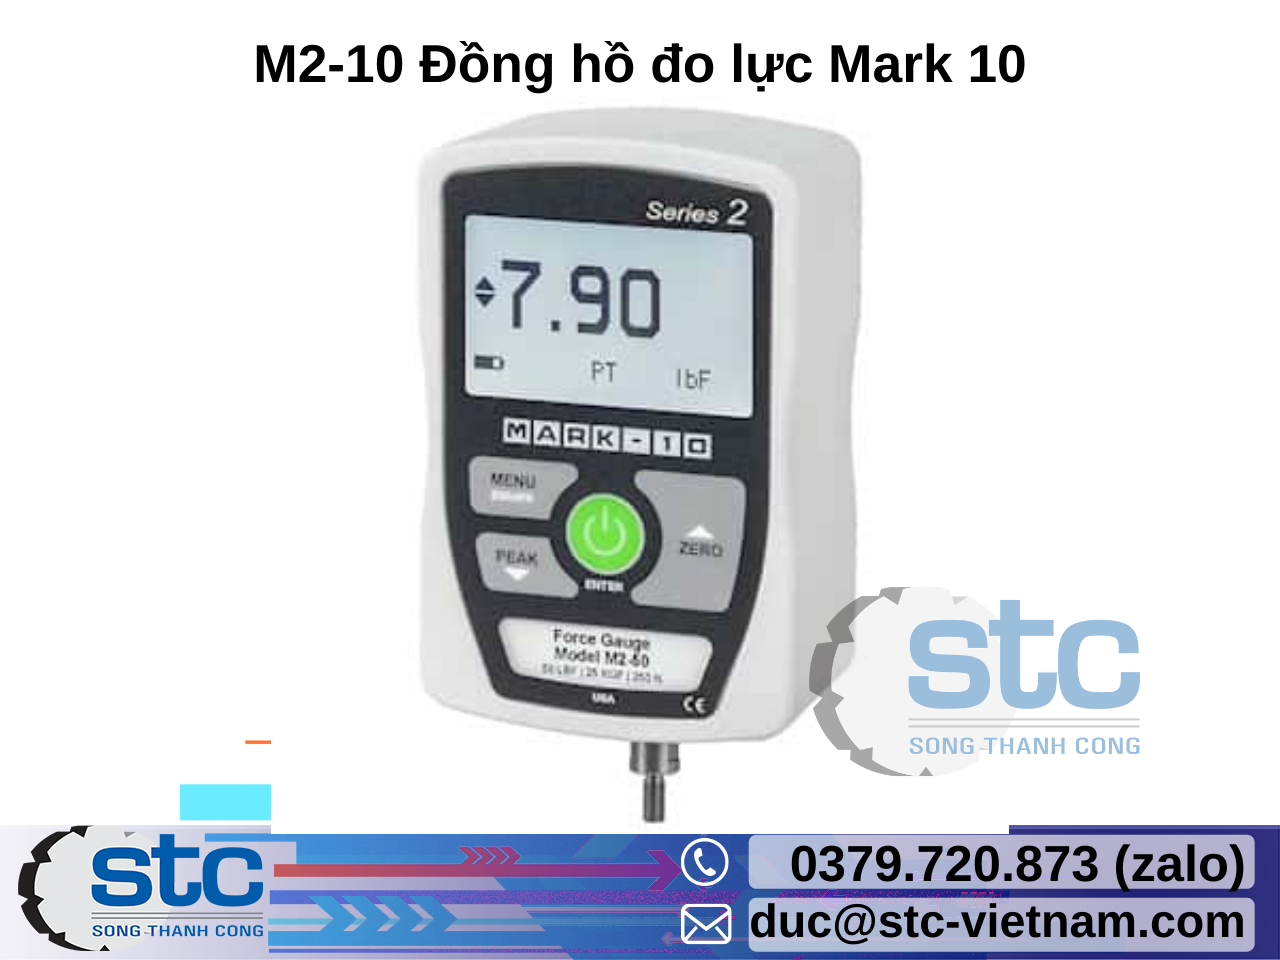 m2-10-dong-ho-do-luc-mark-10.png